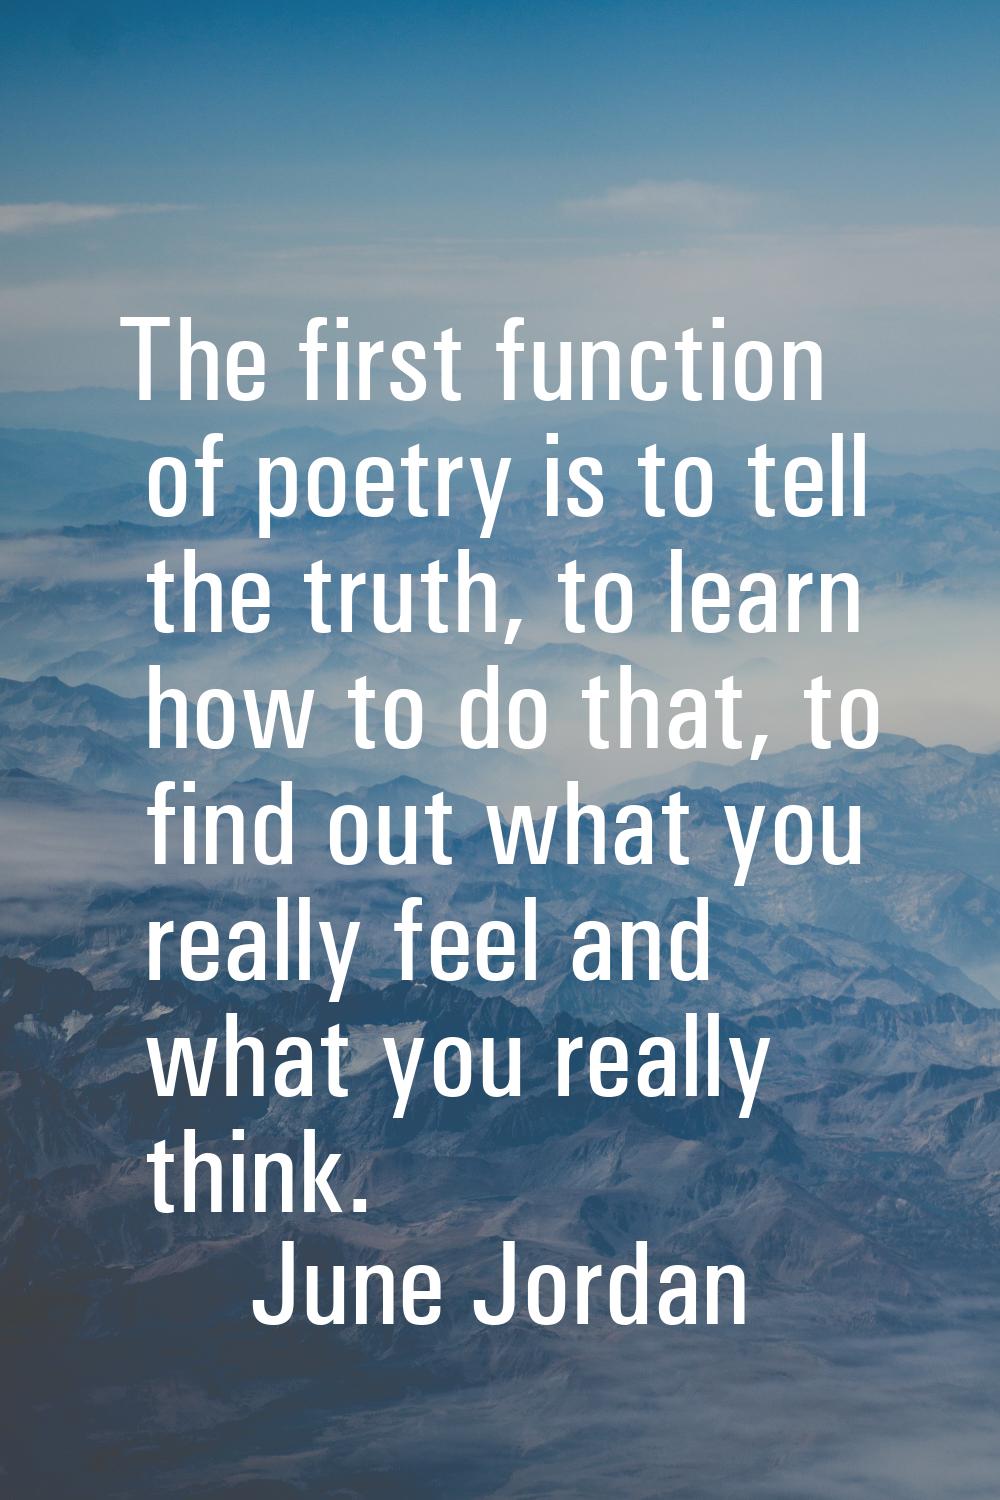 The first function of poetry is to tell the truth, to learn how to do that, to find out what you re